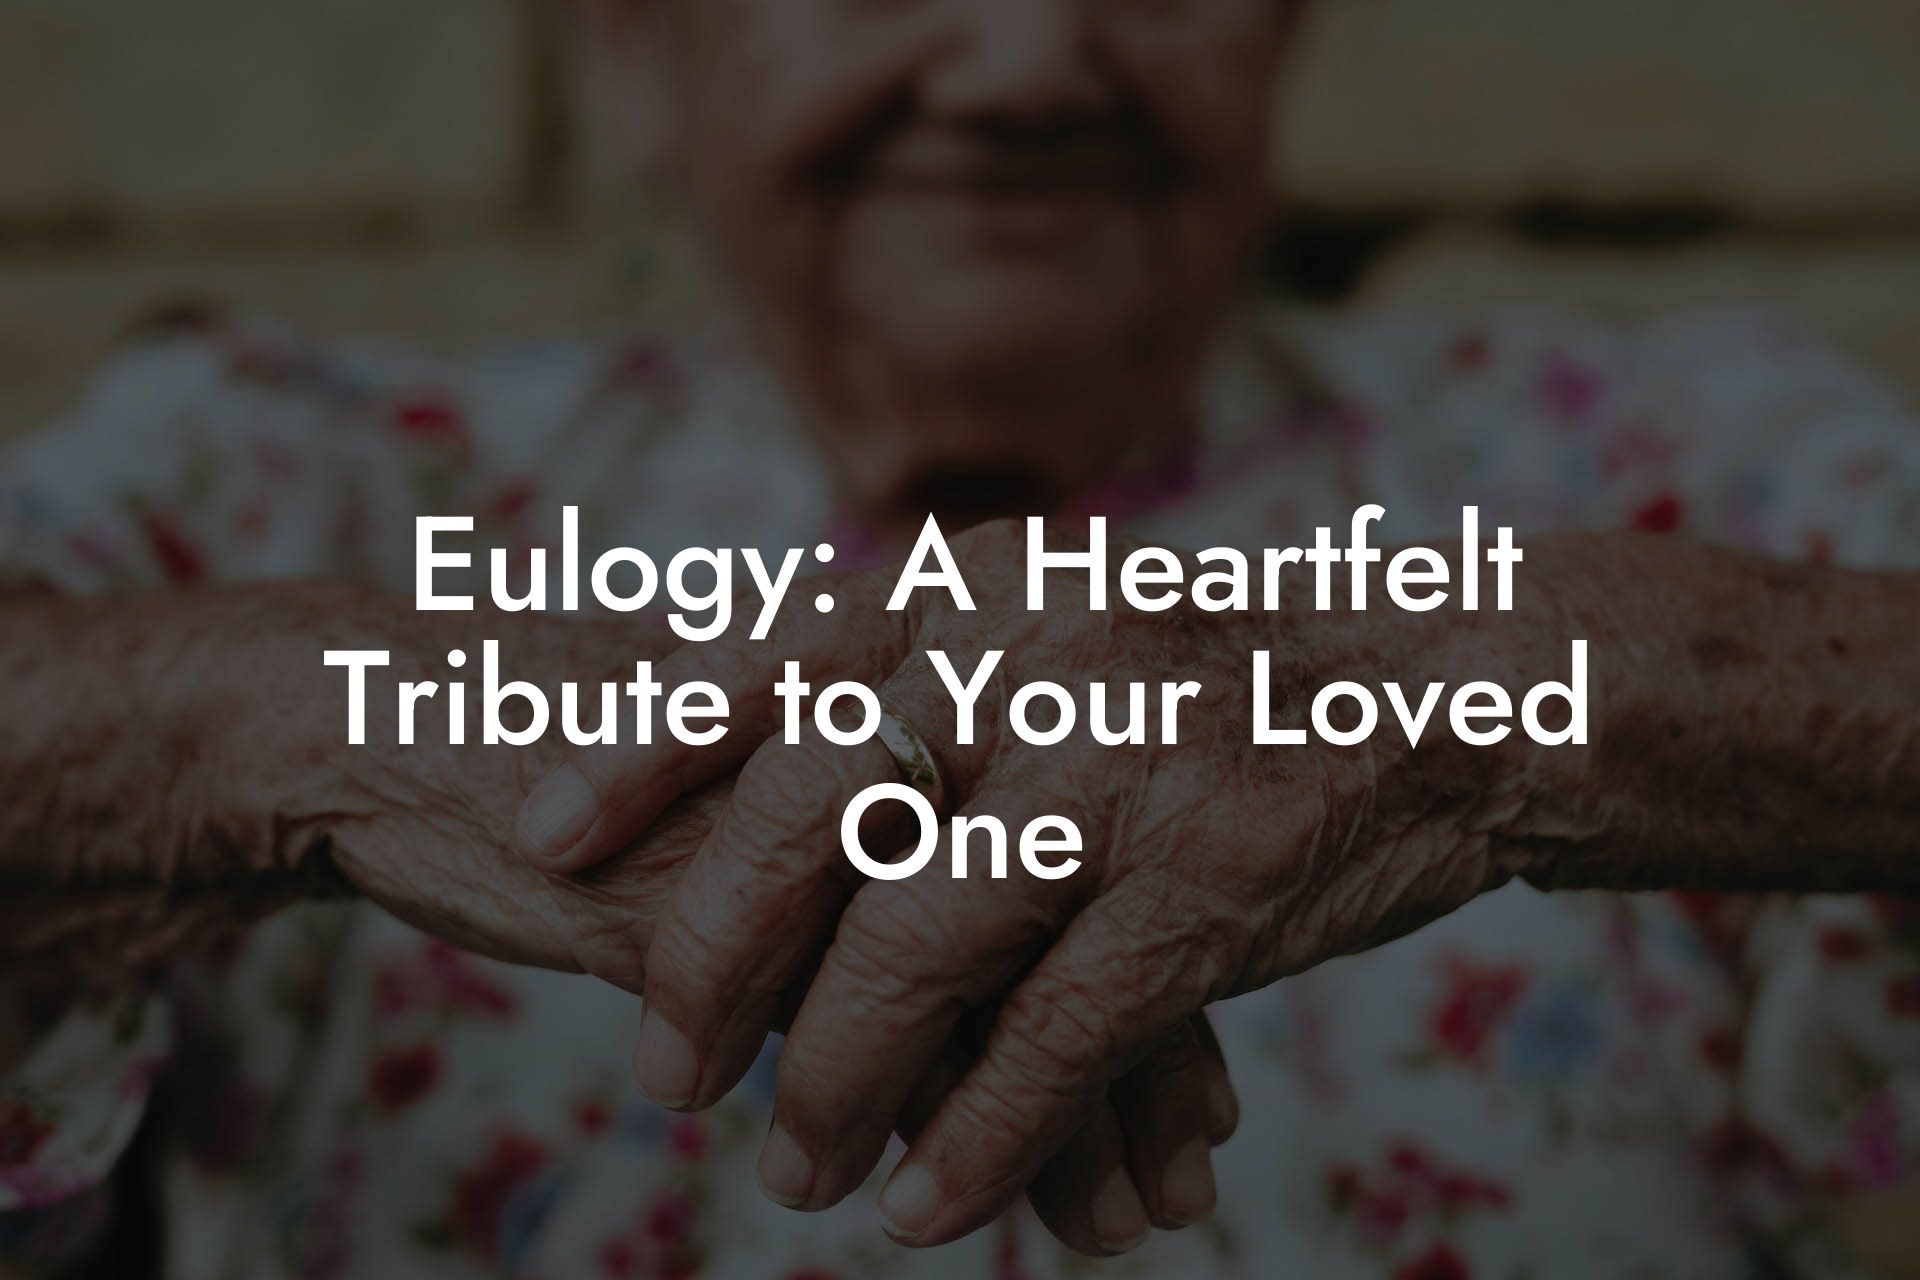 Eulogy: A Heartfelt Tribute to Your Loved One